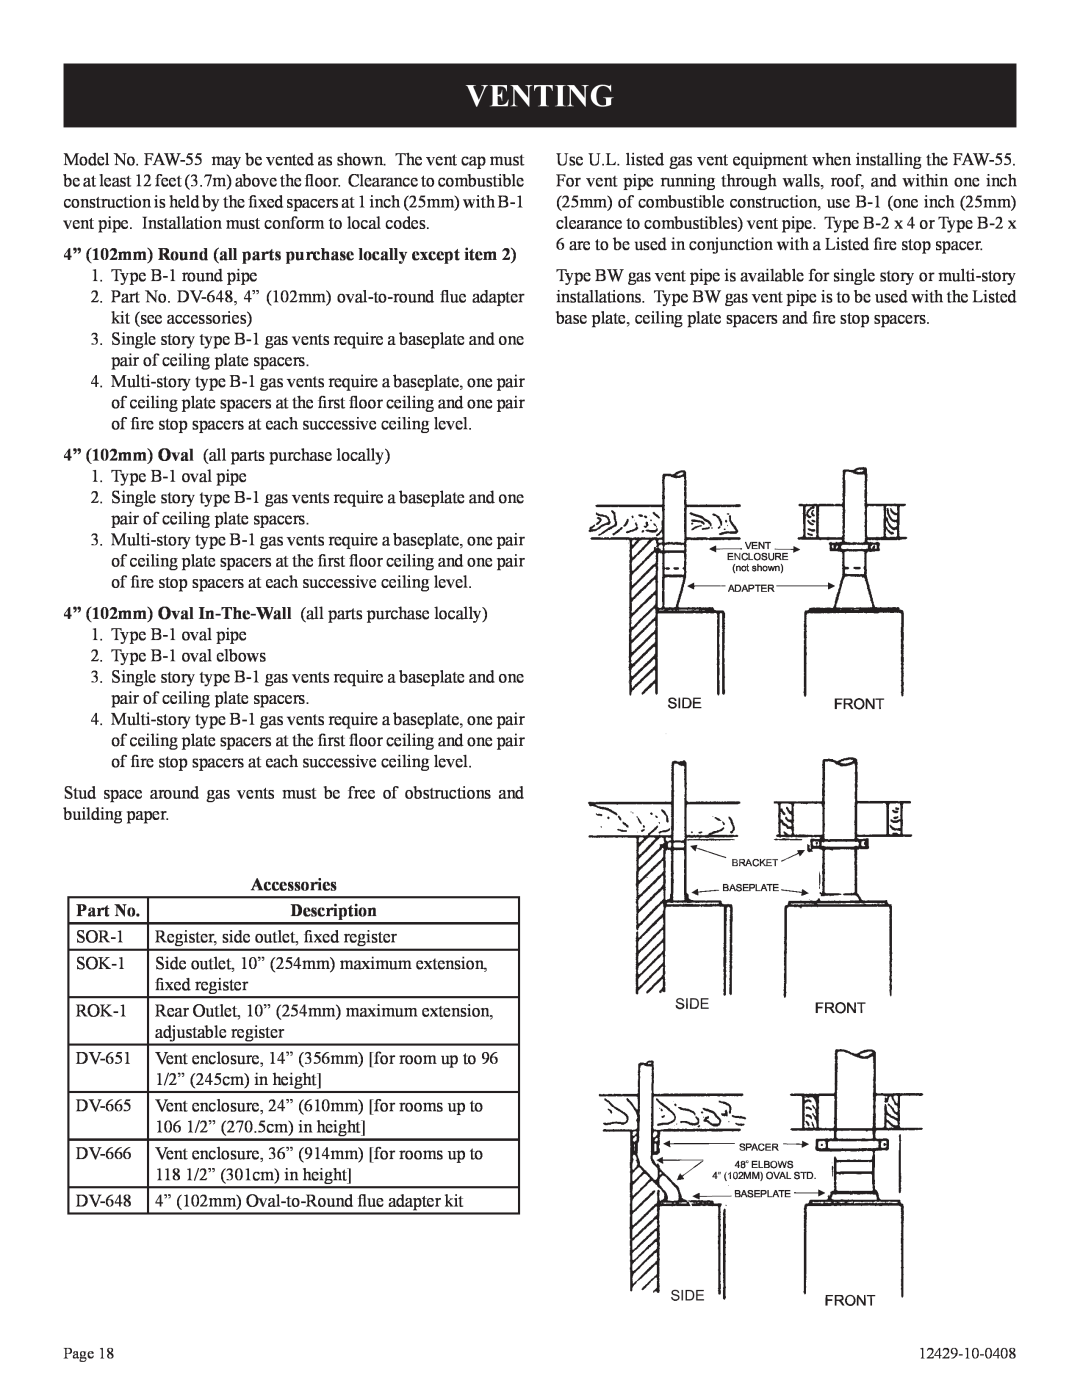 Empire Products FAW-55IP installation instructions Venting, Accessories, Description 